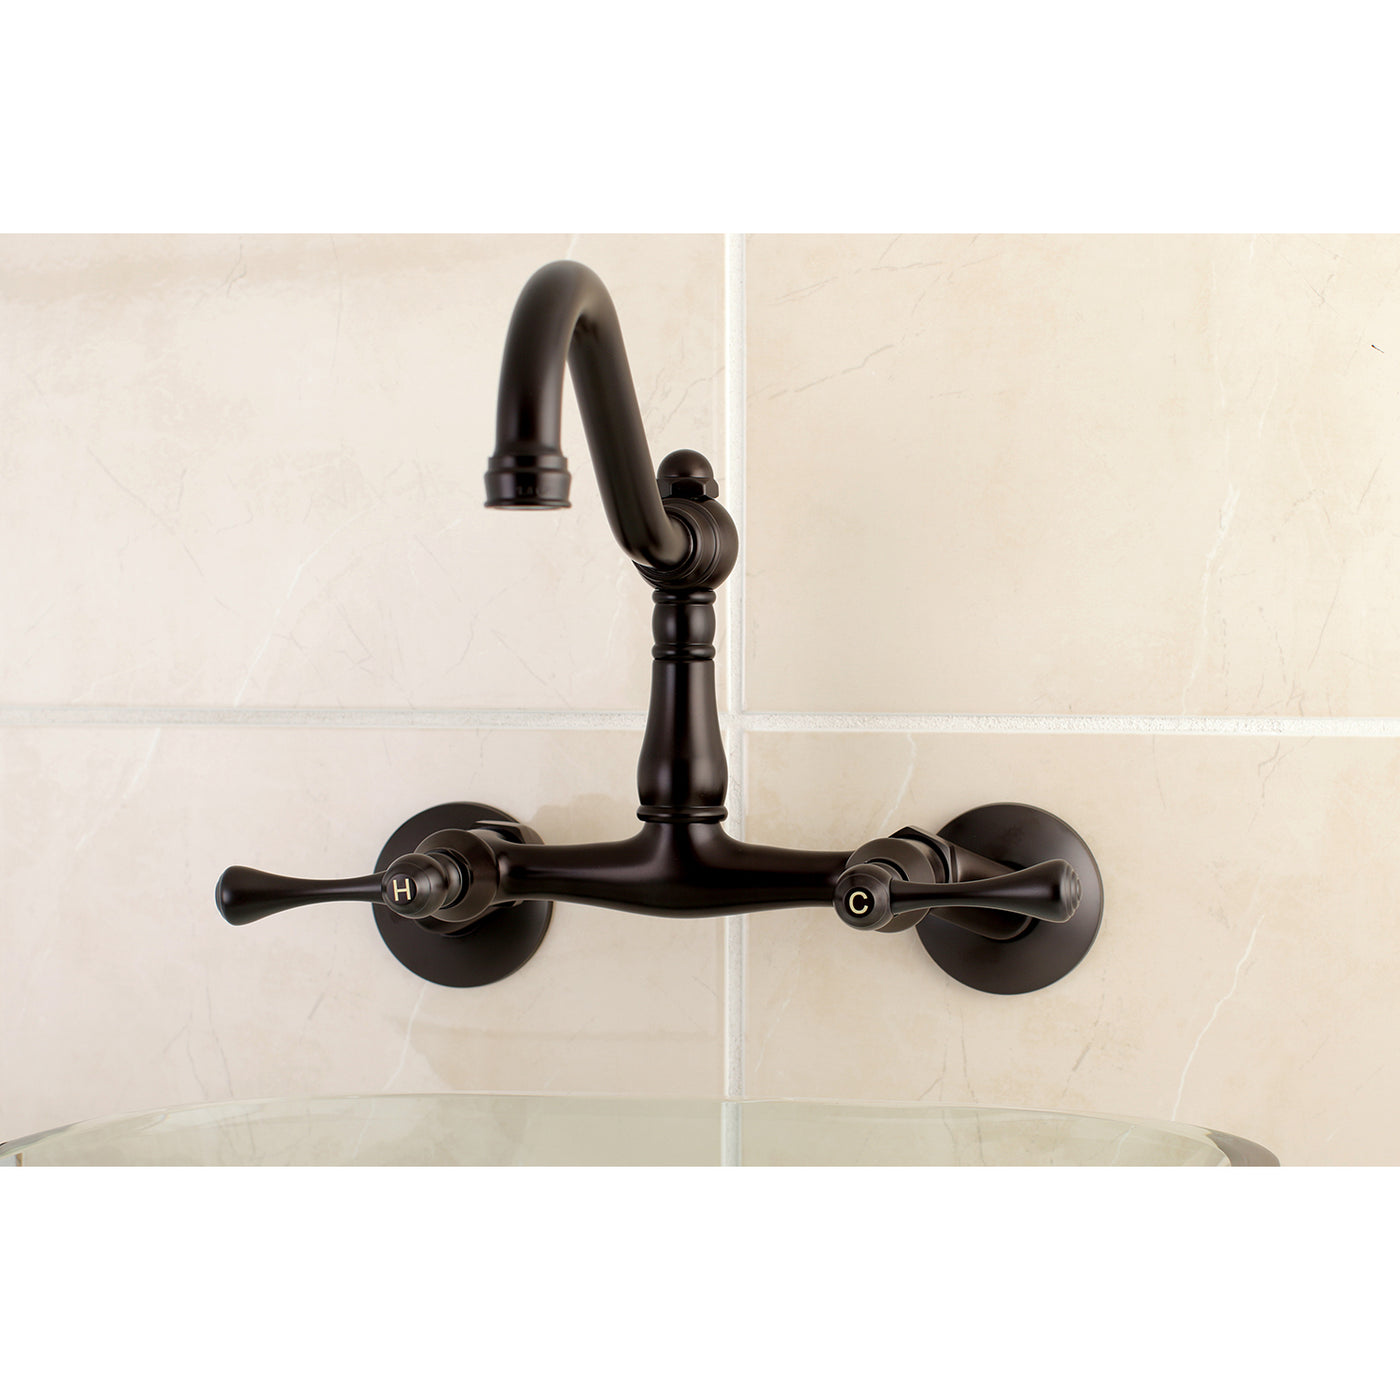 Elements of Design ES3225BL 6-Inch Adjustable Center Wall Mount Kitchen Faucet, Oil Rubbed Bronze